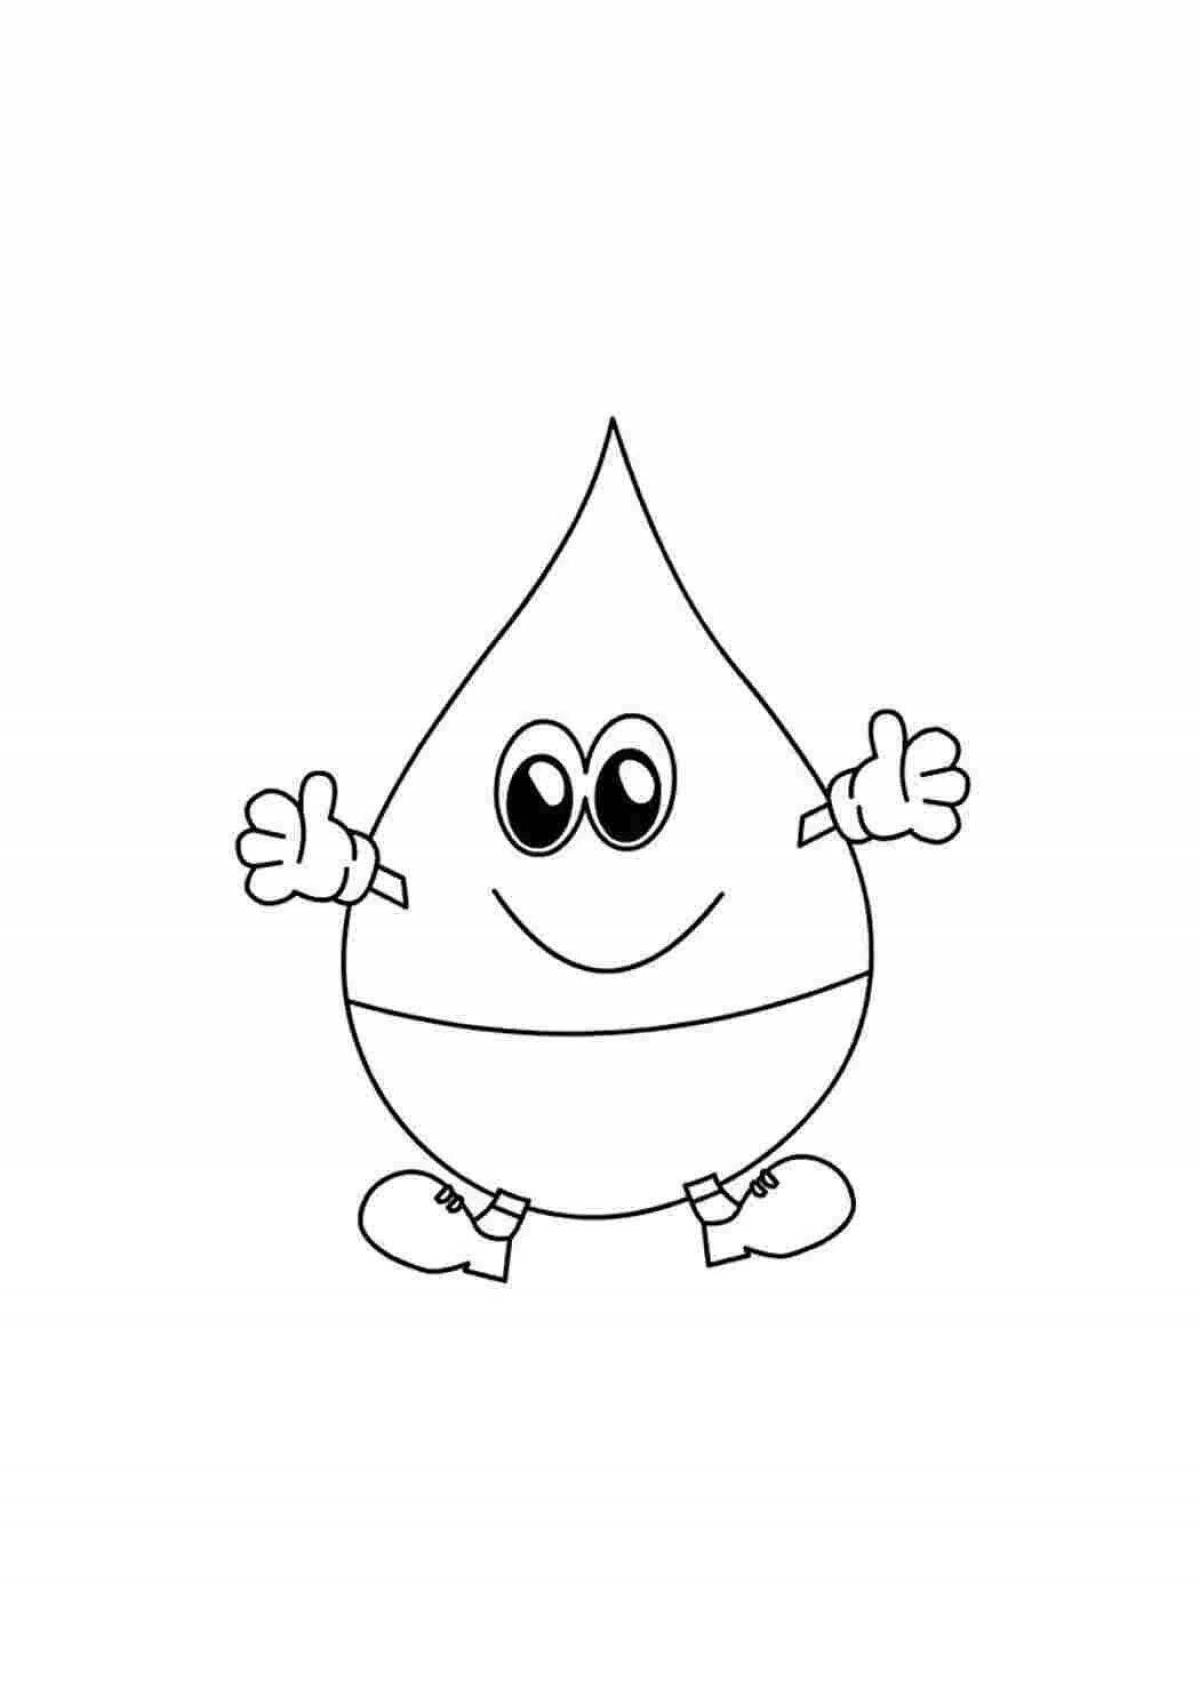 Water drop coloring page